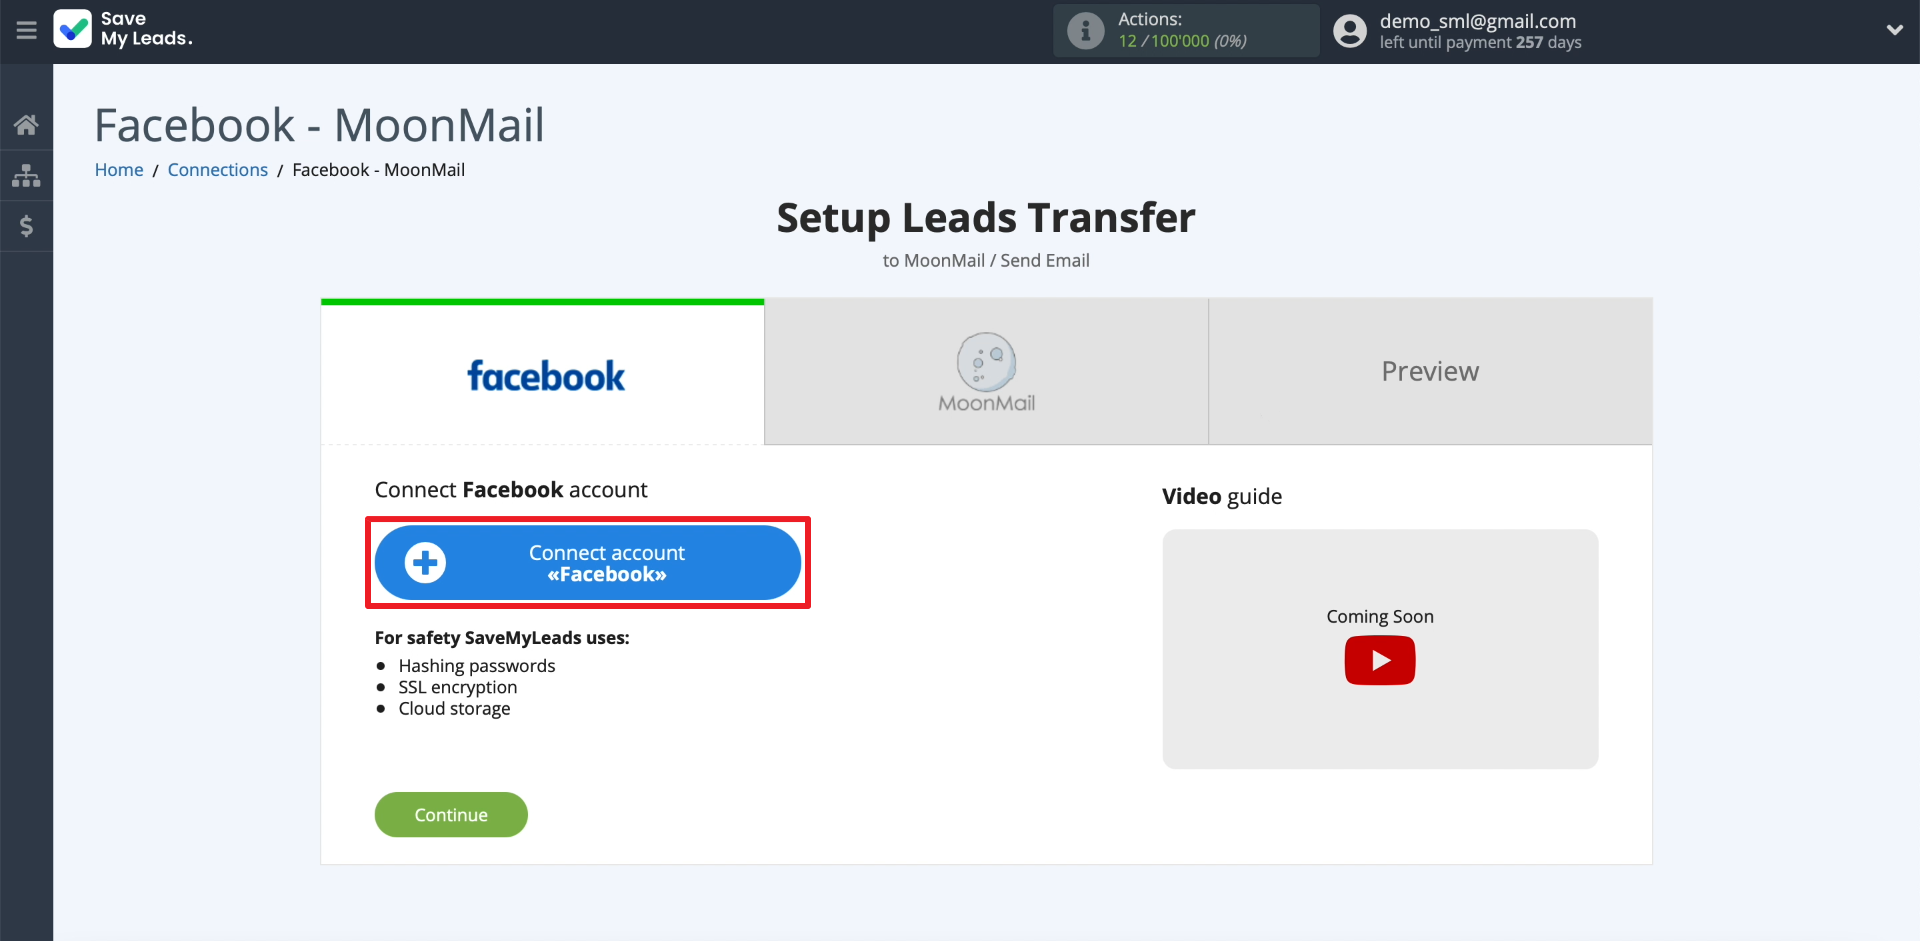 How to Set Up Auto-Send Messages to New Leads on Facebook via MoonMail | Connect your Facebook account